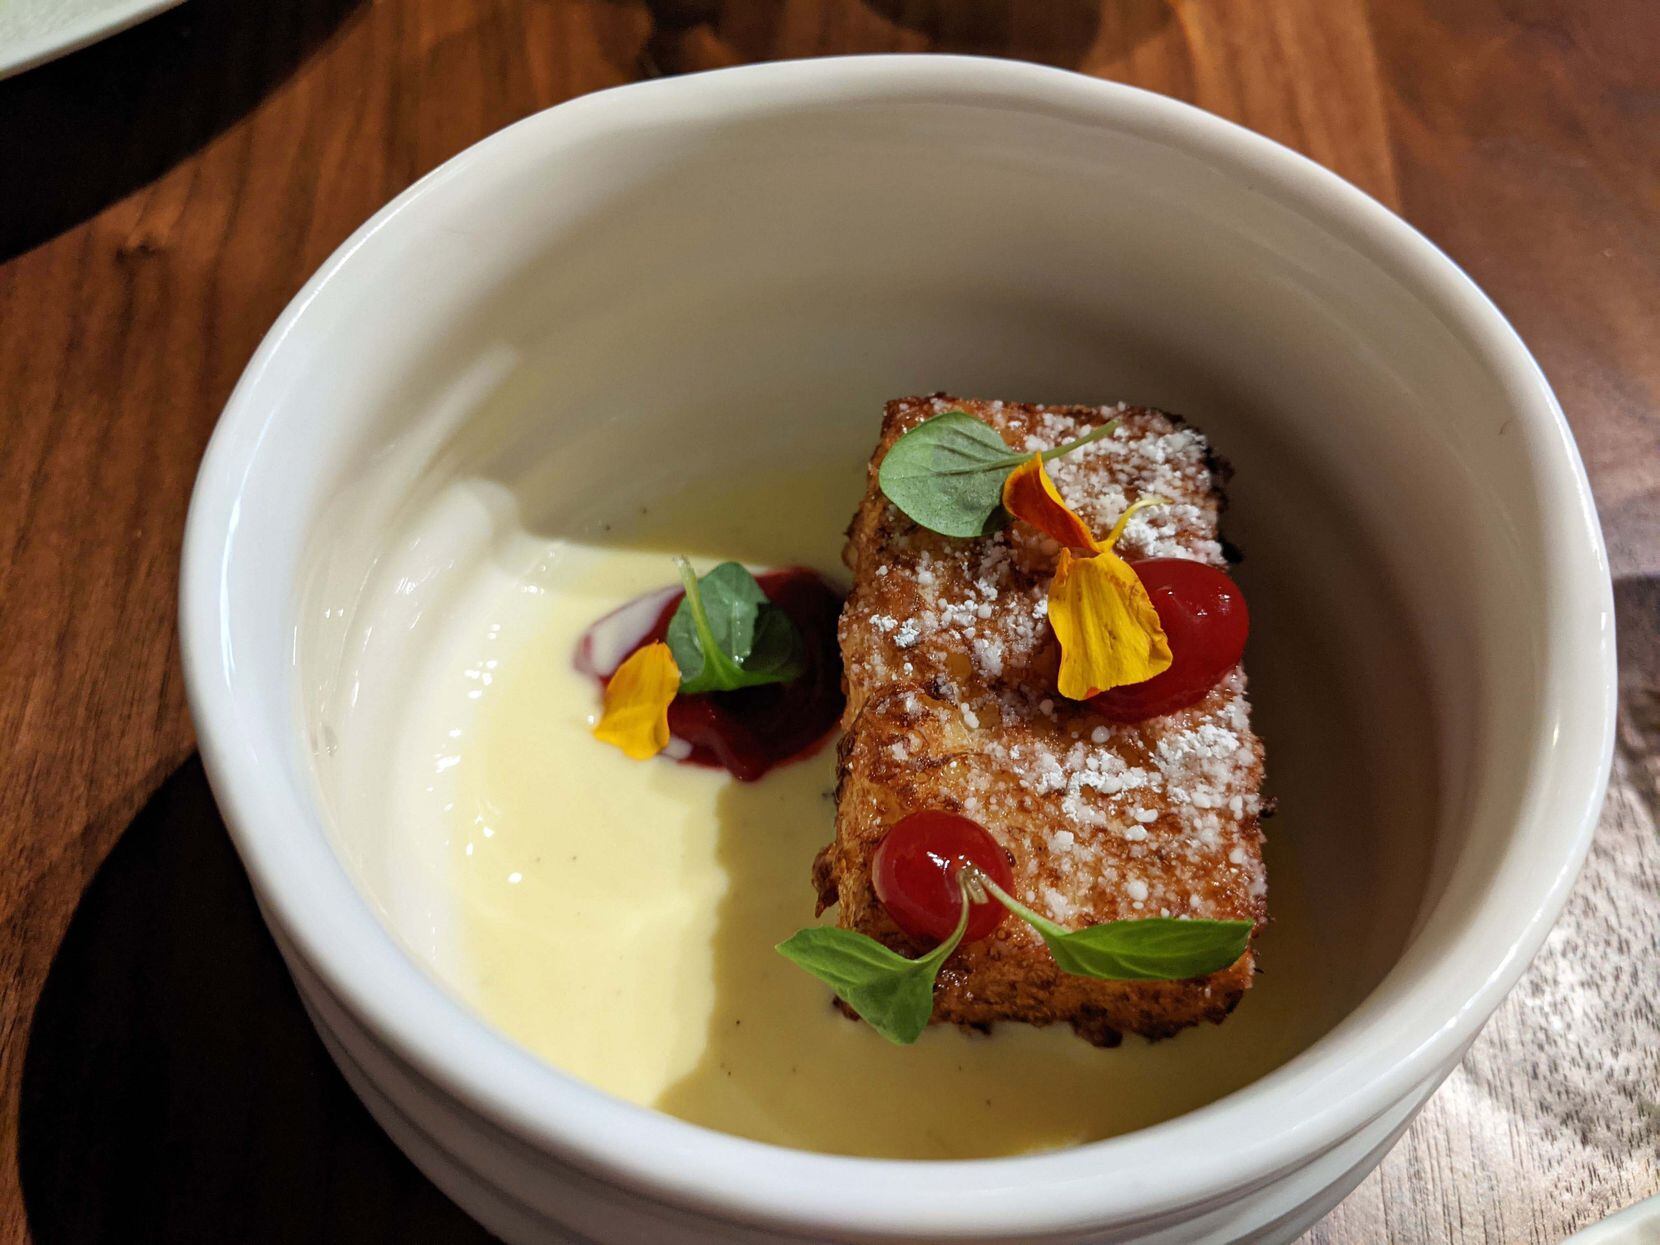 Carte Blanche's passion fruit French toast, which our reviewer said tasted like a funnel cake.